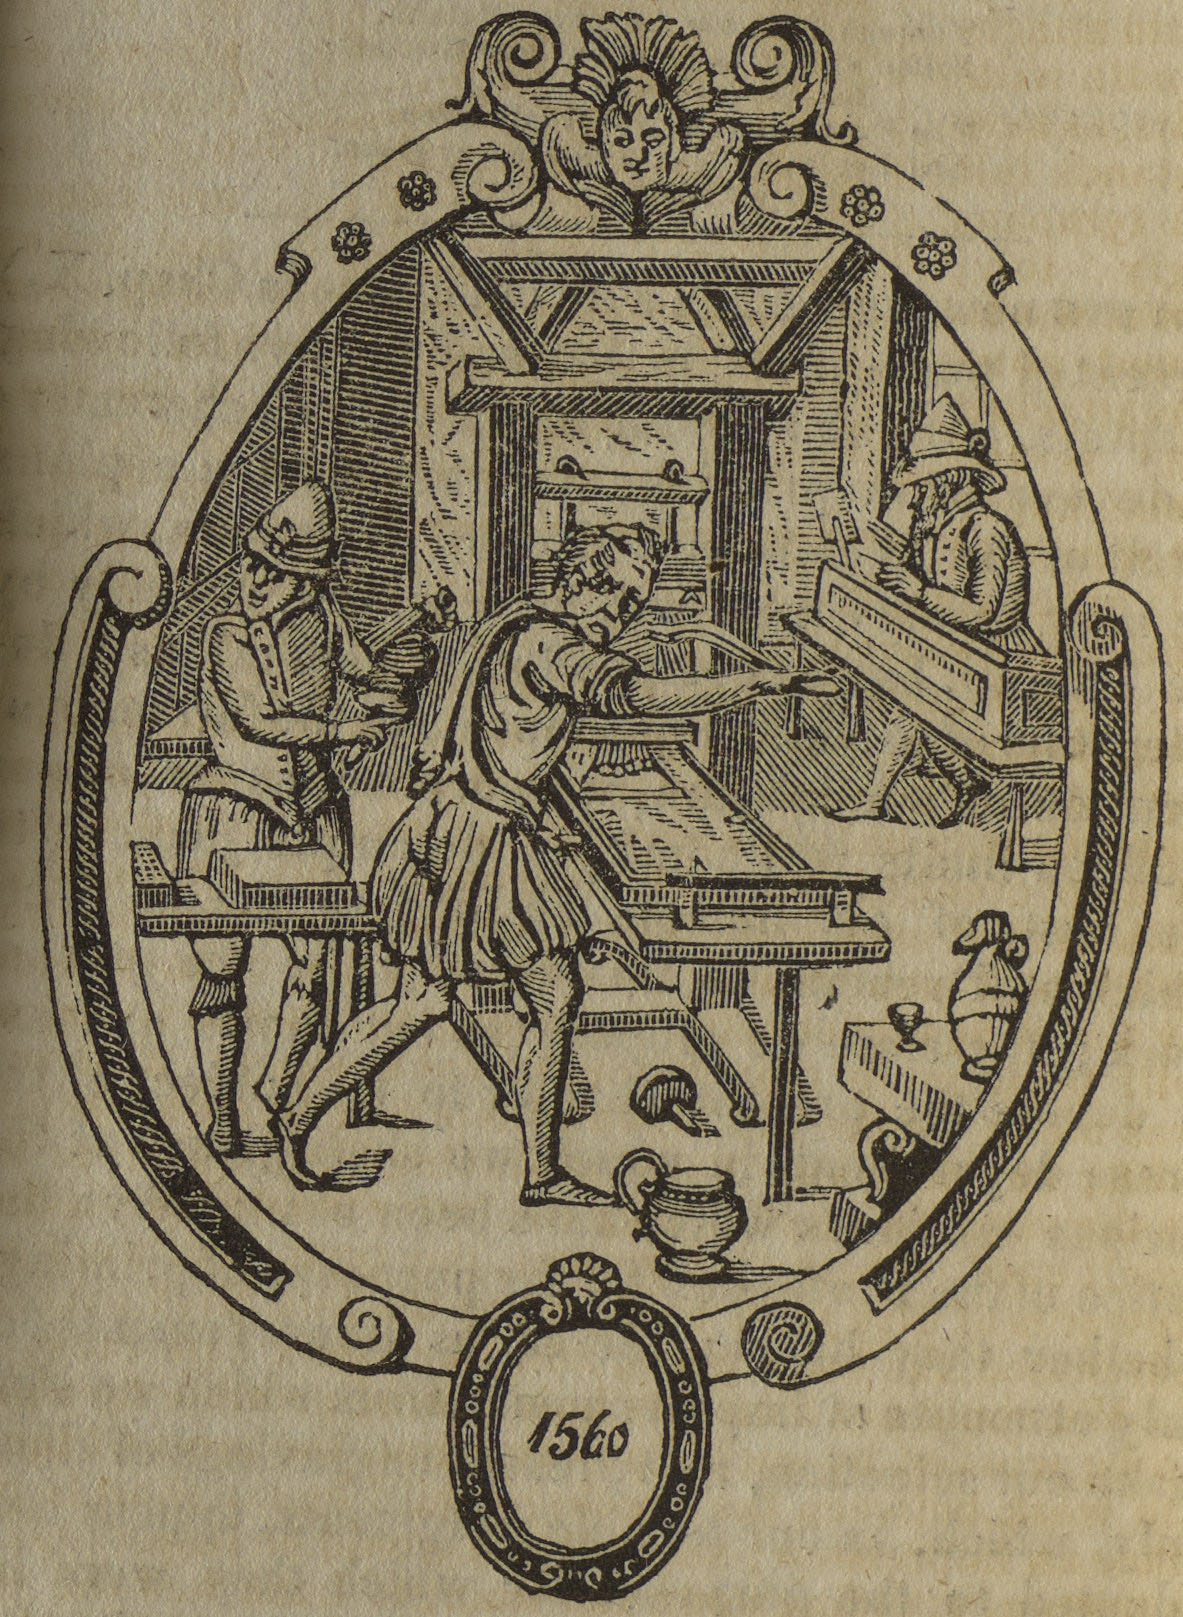 A sixteenth-century press, from volume two of John Johnson’s Typographia, or The Printer’s Instructor